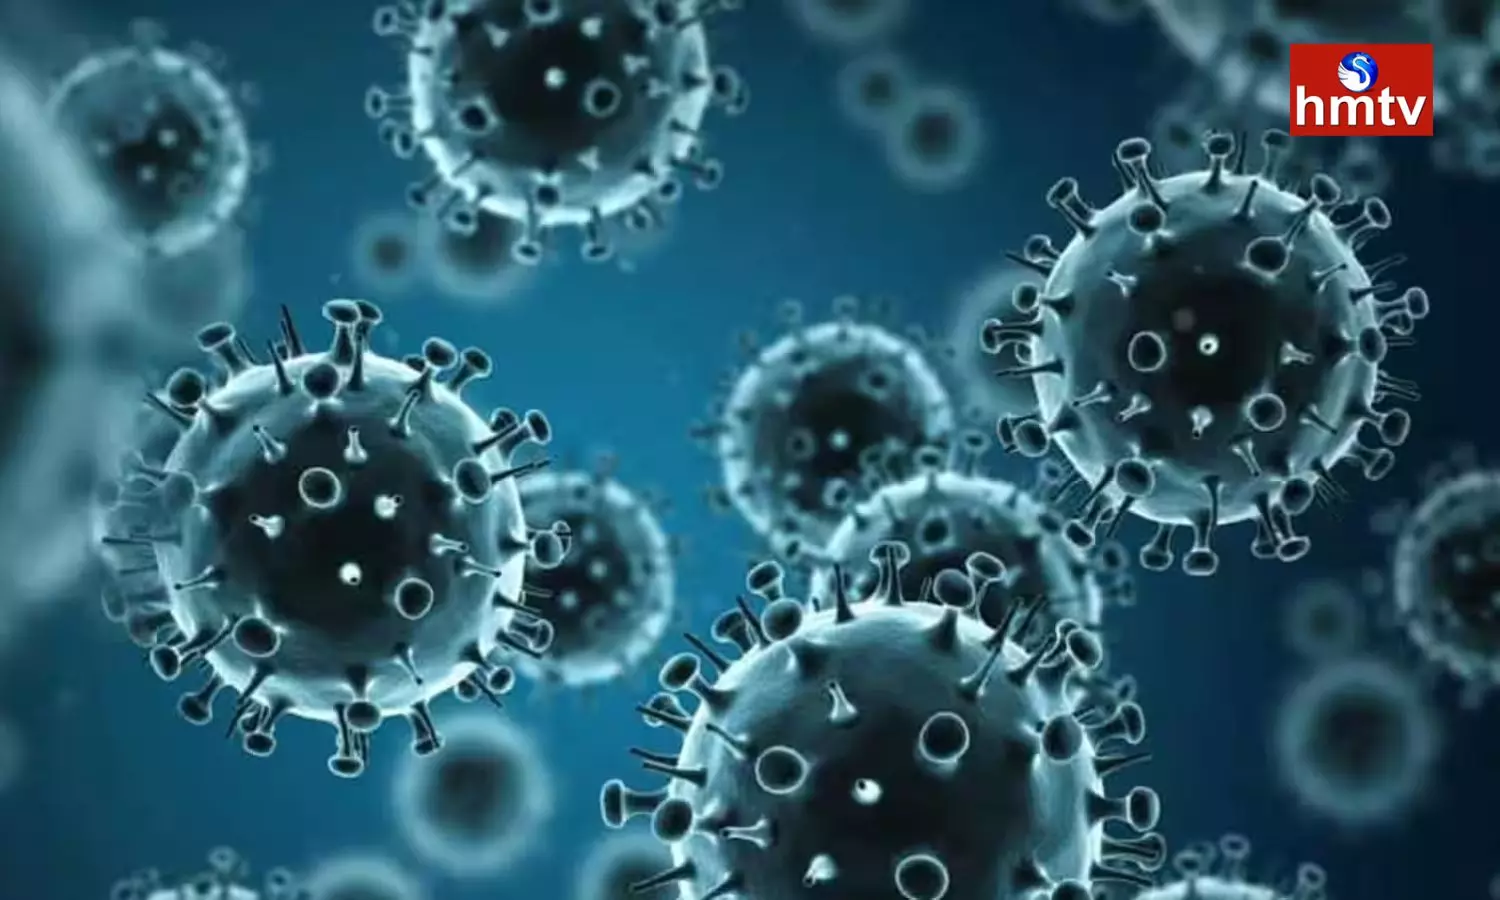 H3N2 Virus Is Prevalent In The Country